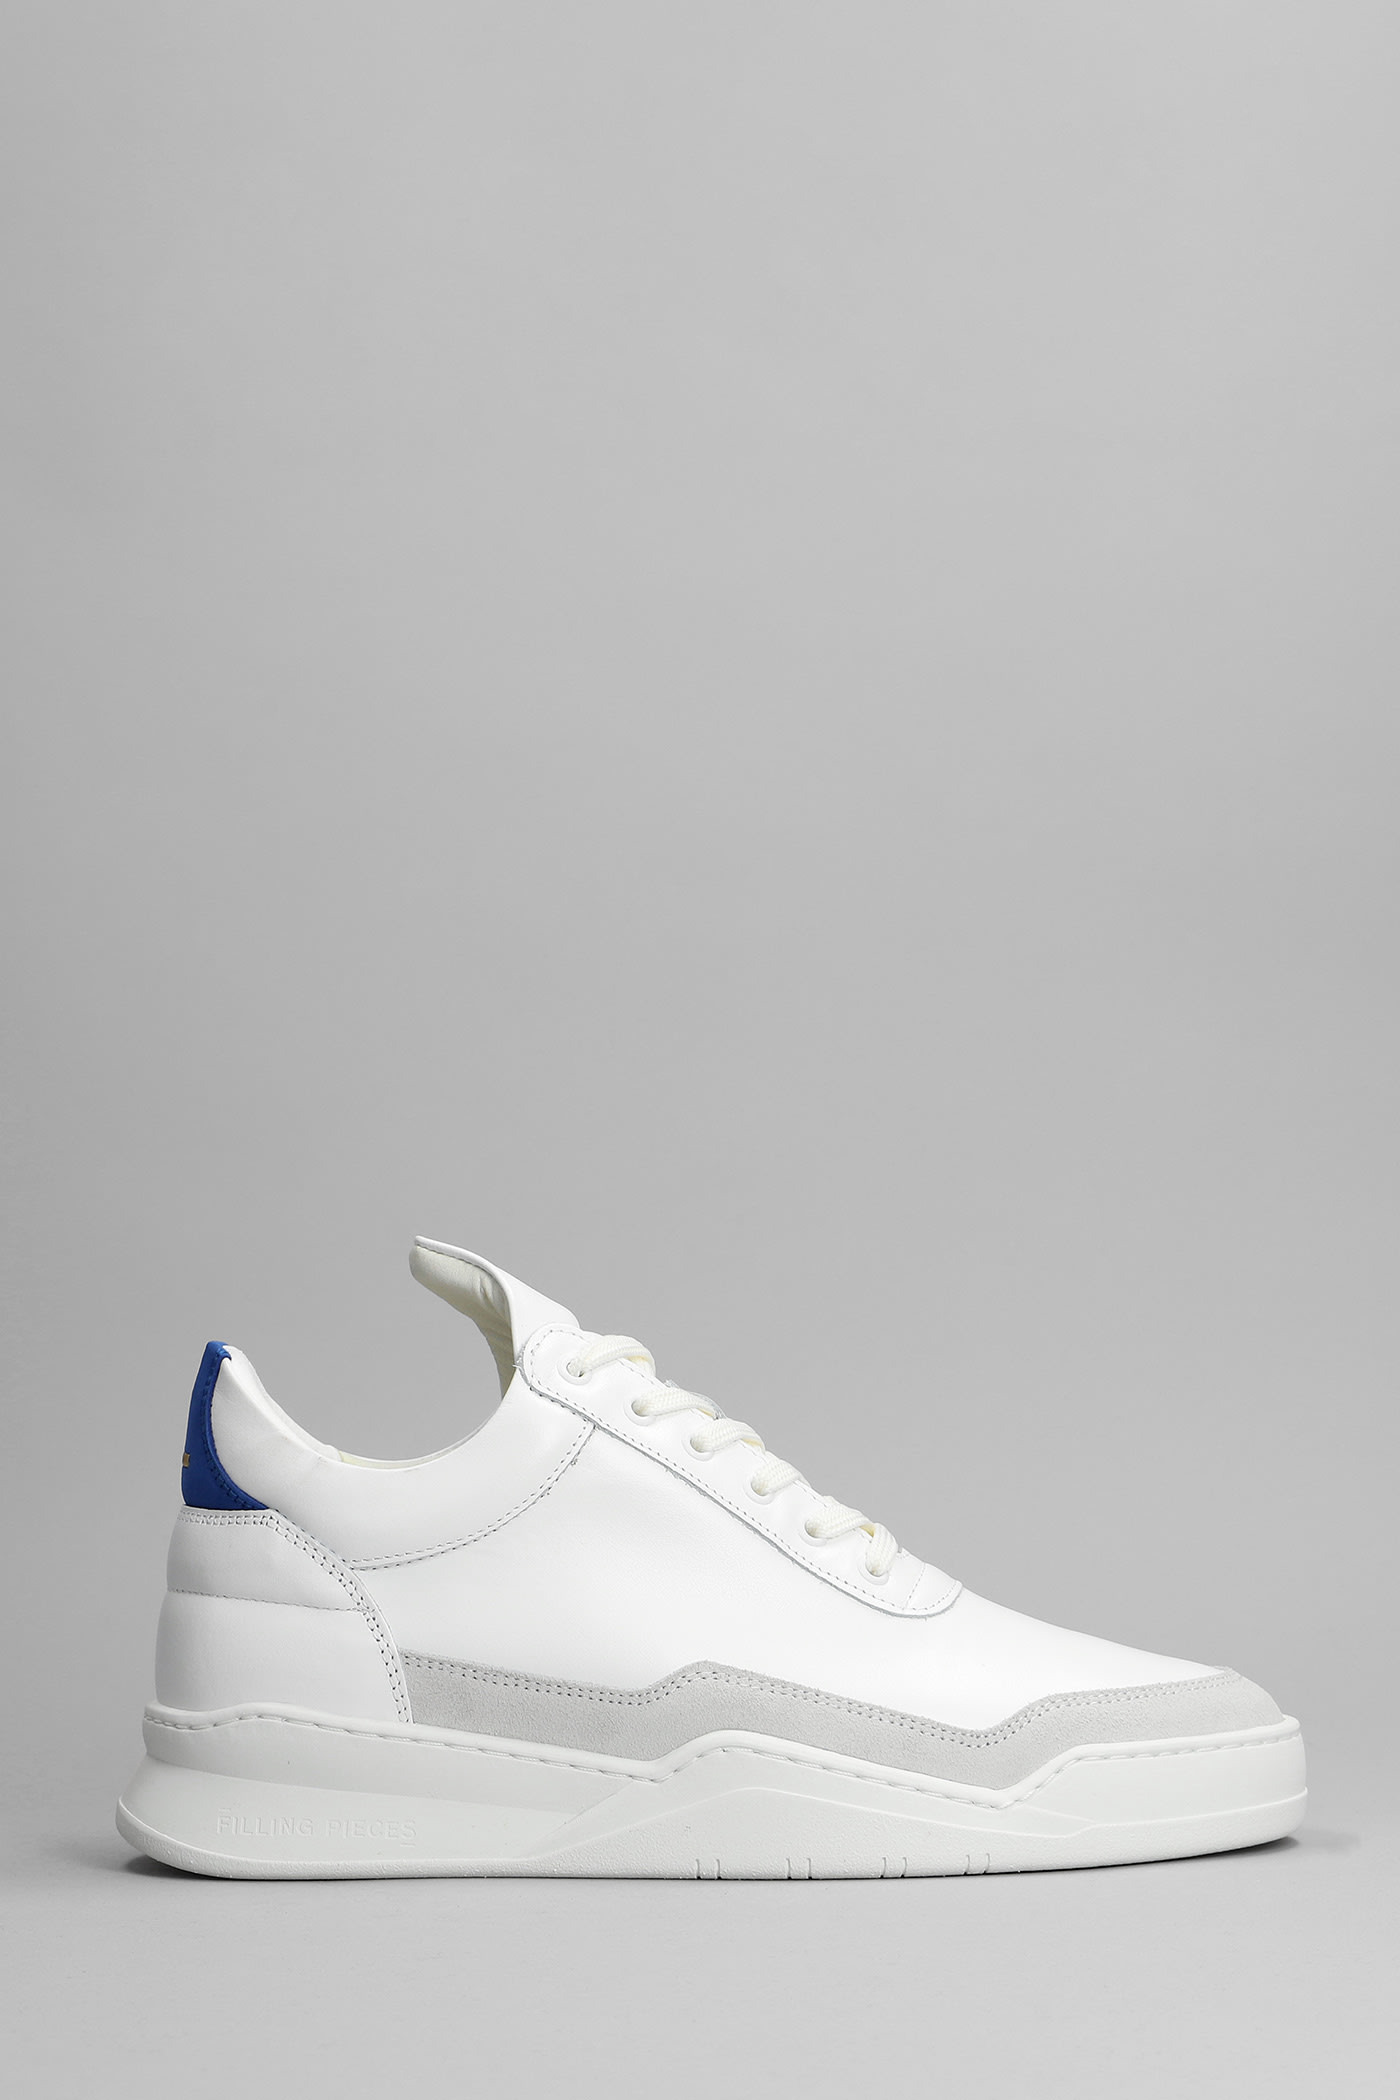 Filling Pieces Sneakers In White Suede And Leather